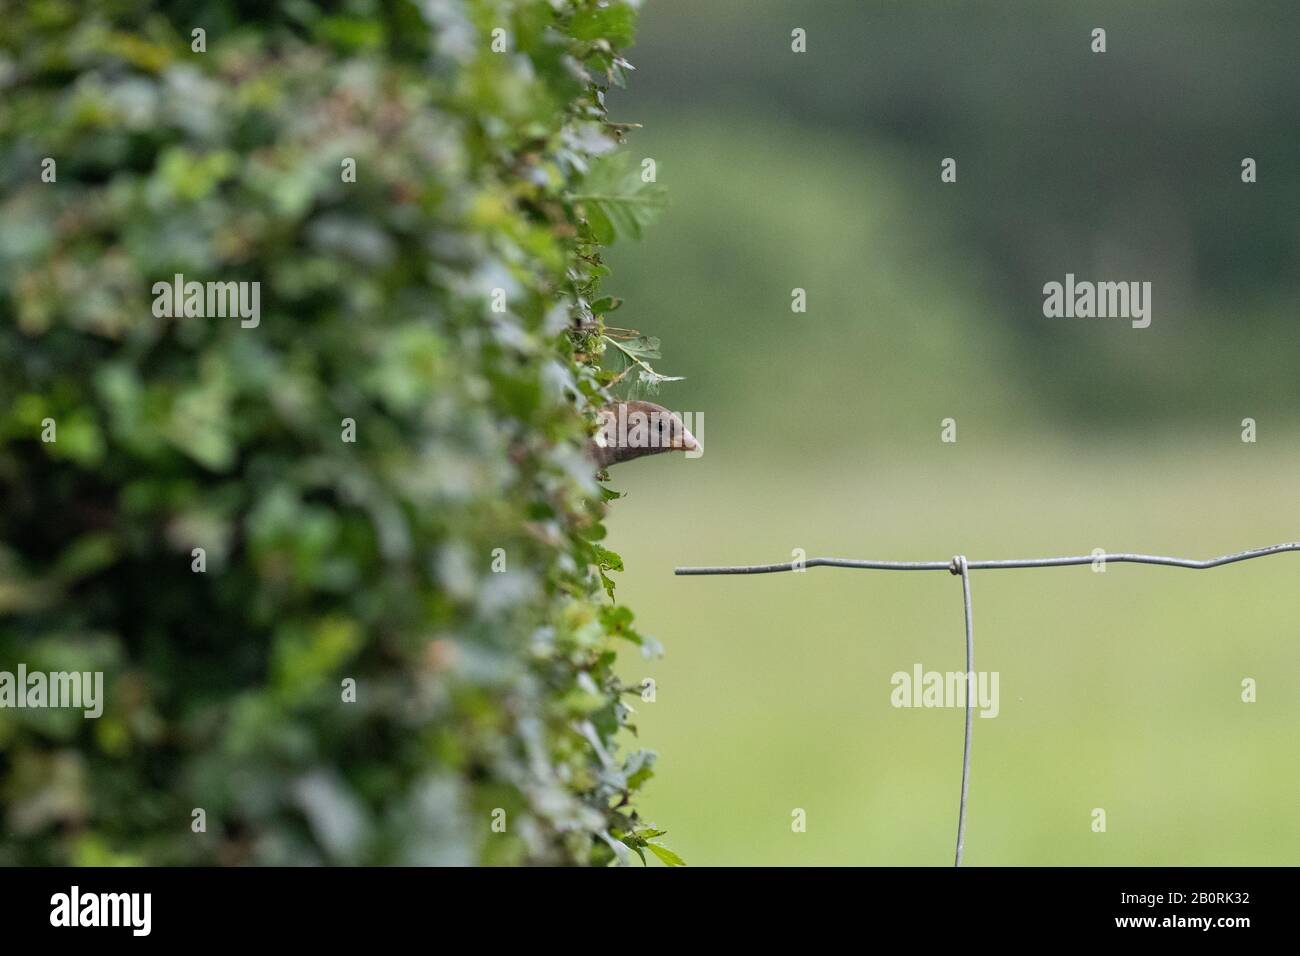 A sparrow cautiously peeking out of a hedgerow with a soft focus background Stock Photo